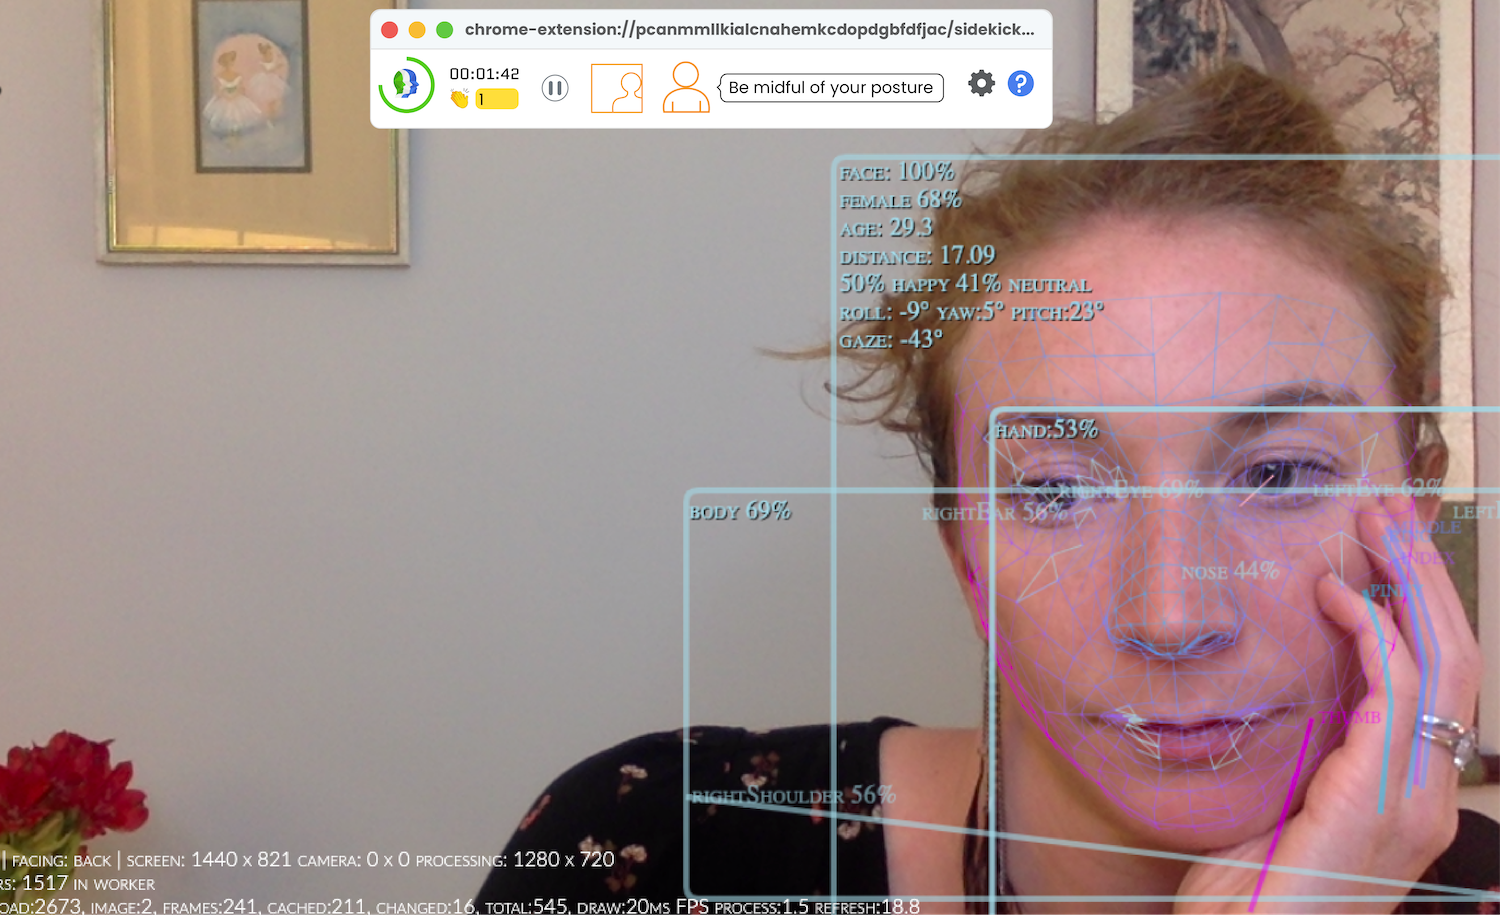 A screenashot shows how Virtual Sapien's Sidekick product provides real-time feedback about a user's body language.